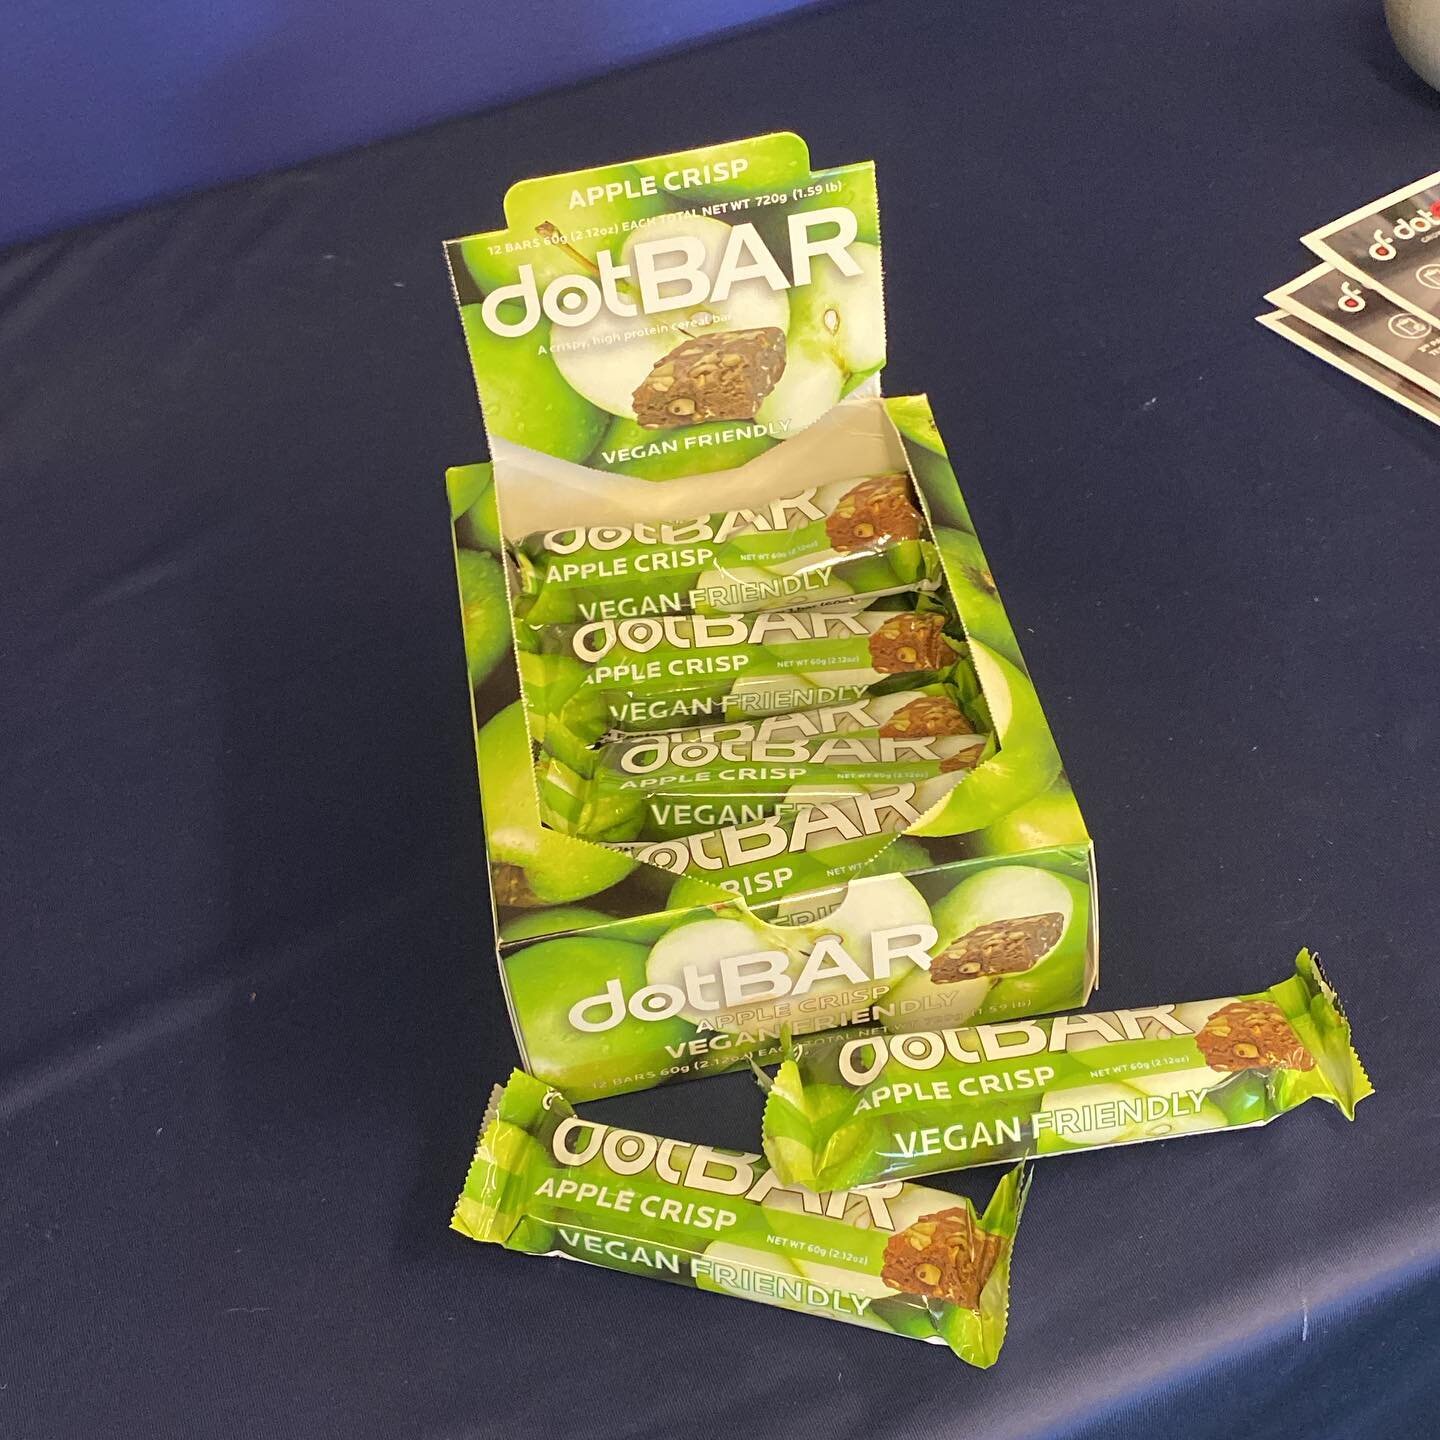 Have you tried the new flavor dotFIT bar?!

Introducing Apple Crisp. Limited supply, get them while they are hot. 

Talk to your trainer today about snagging one. 

#fitlife #gym #gymmotivation #fitnessmotivation #gymlife #strength #workout #fitnessa